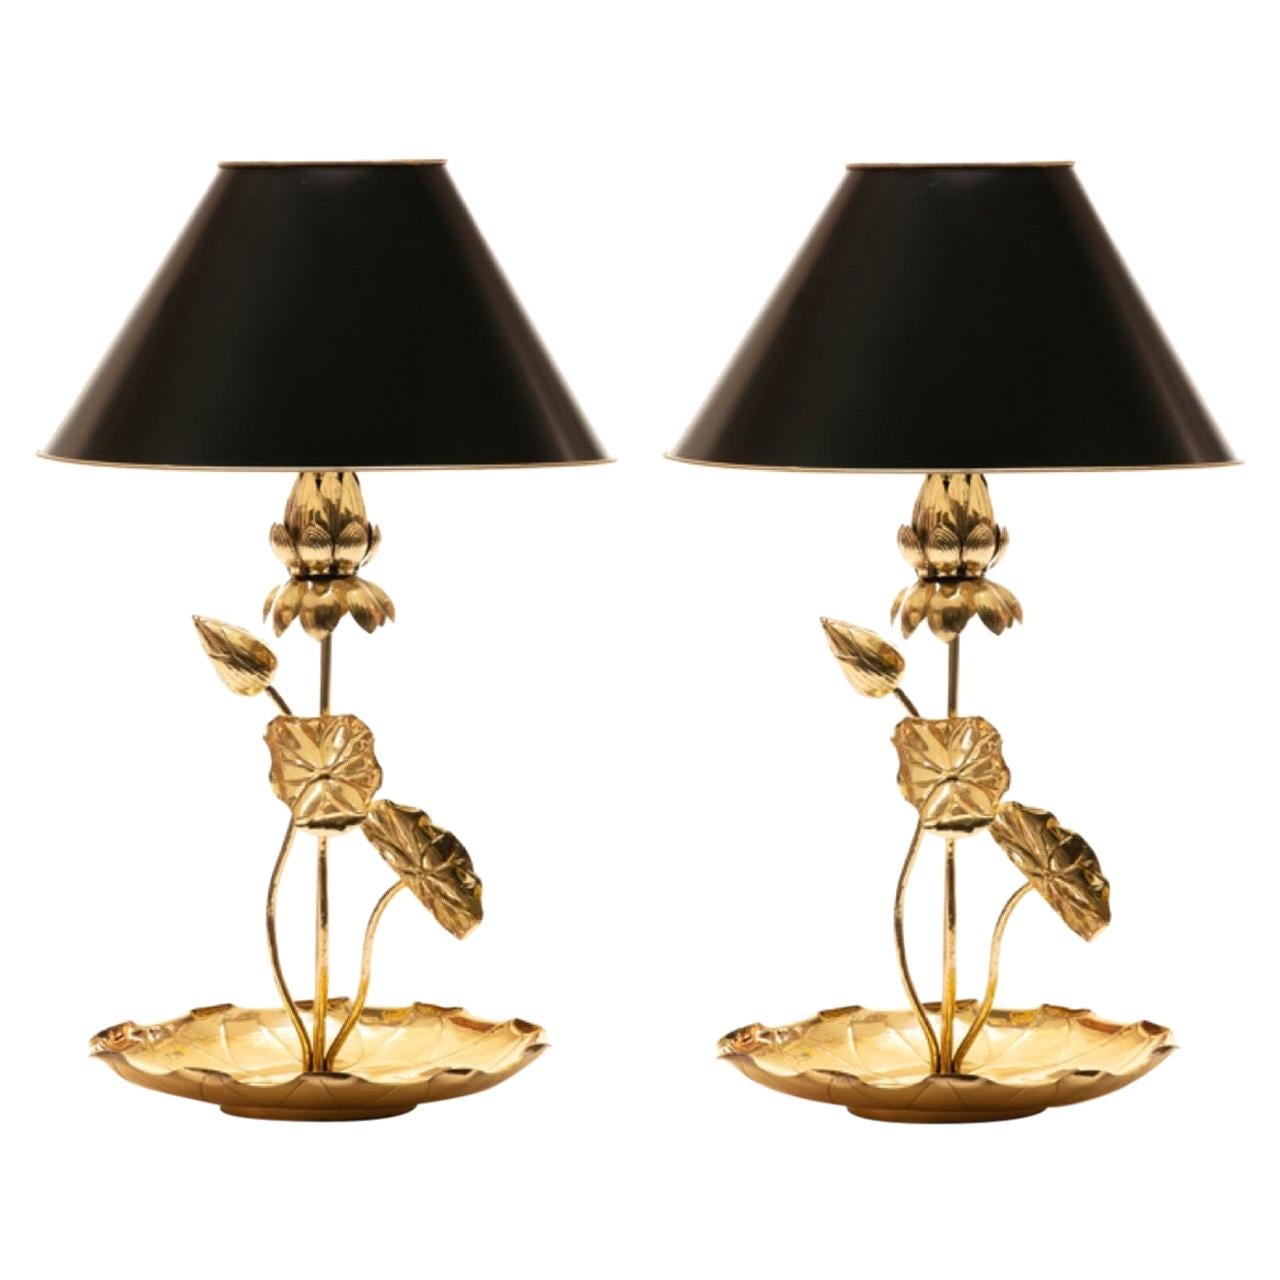 Pair of Feldman Brass Lotus Lamps in the Style of Parzinger, circa 1960